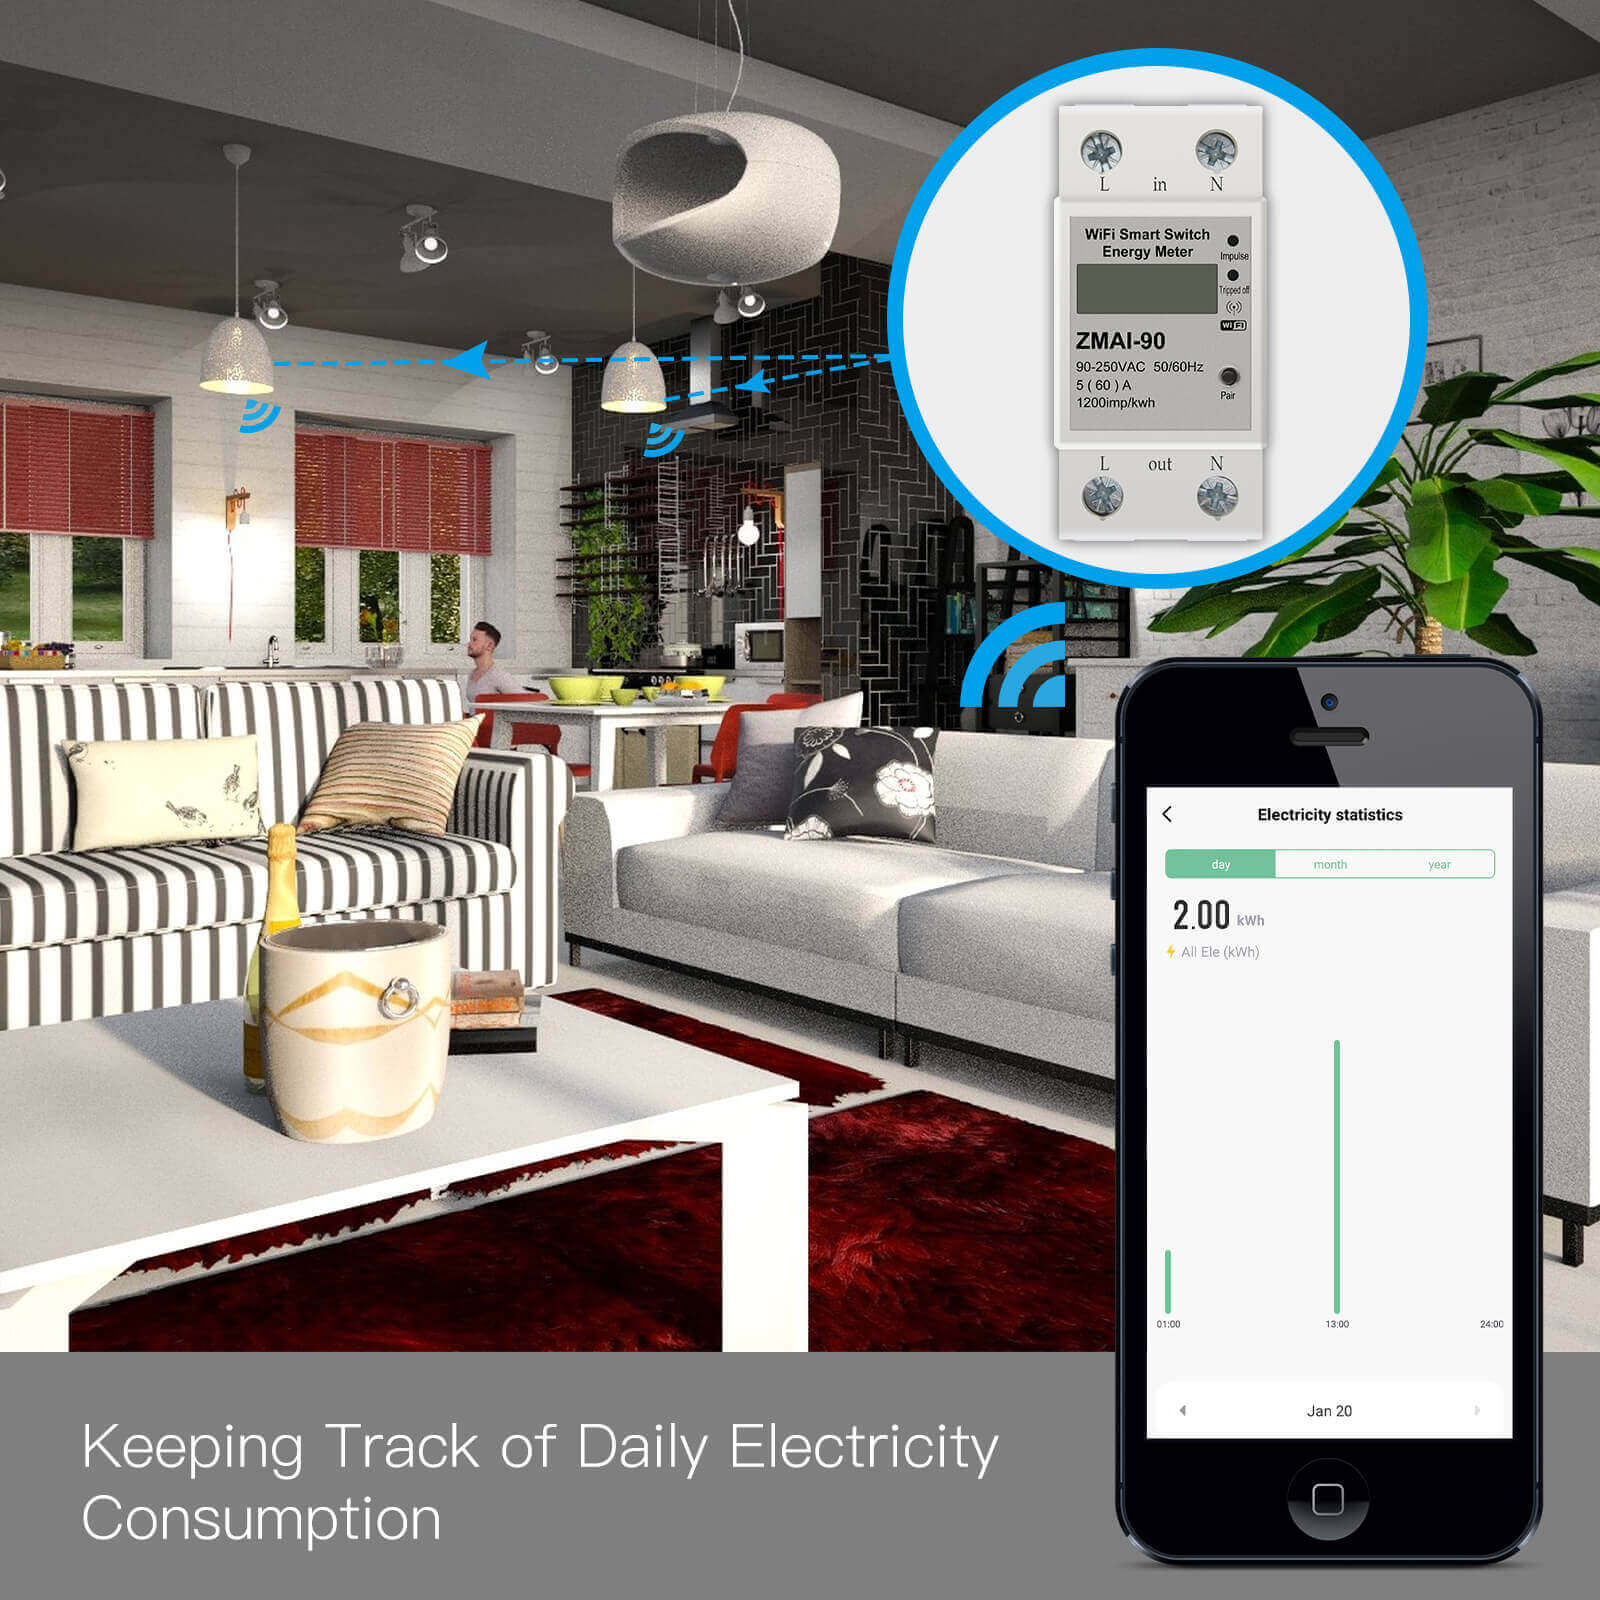 Can SmartLife or TreatLife app monitor power usage of WiFi Wall